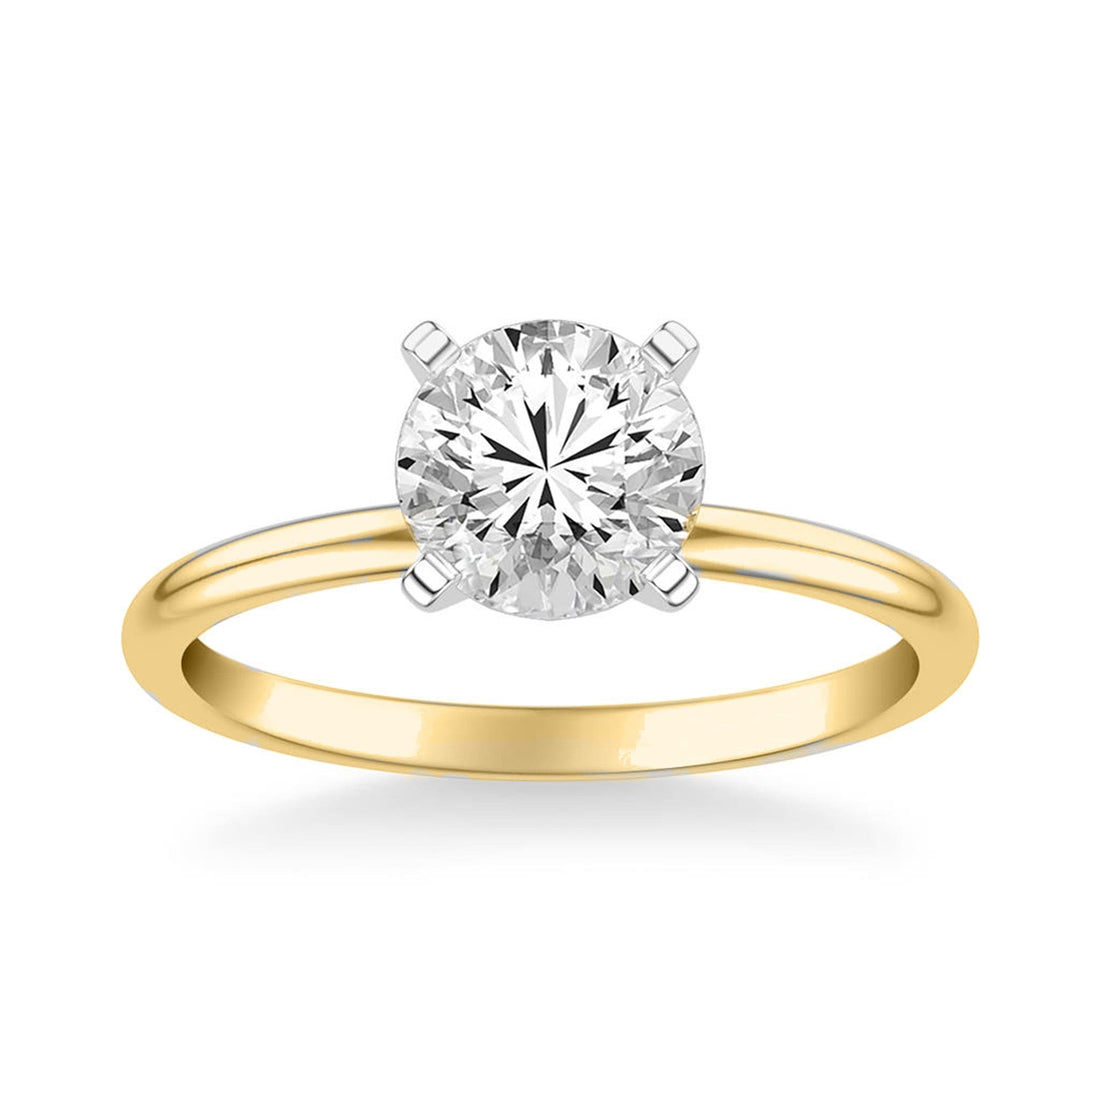 Two-Tone Gold Solitaire Engagement Ring by Frederick Goldman Yellow Gold